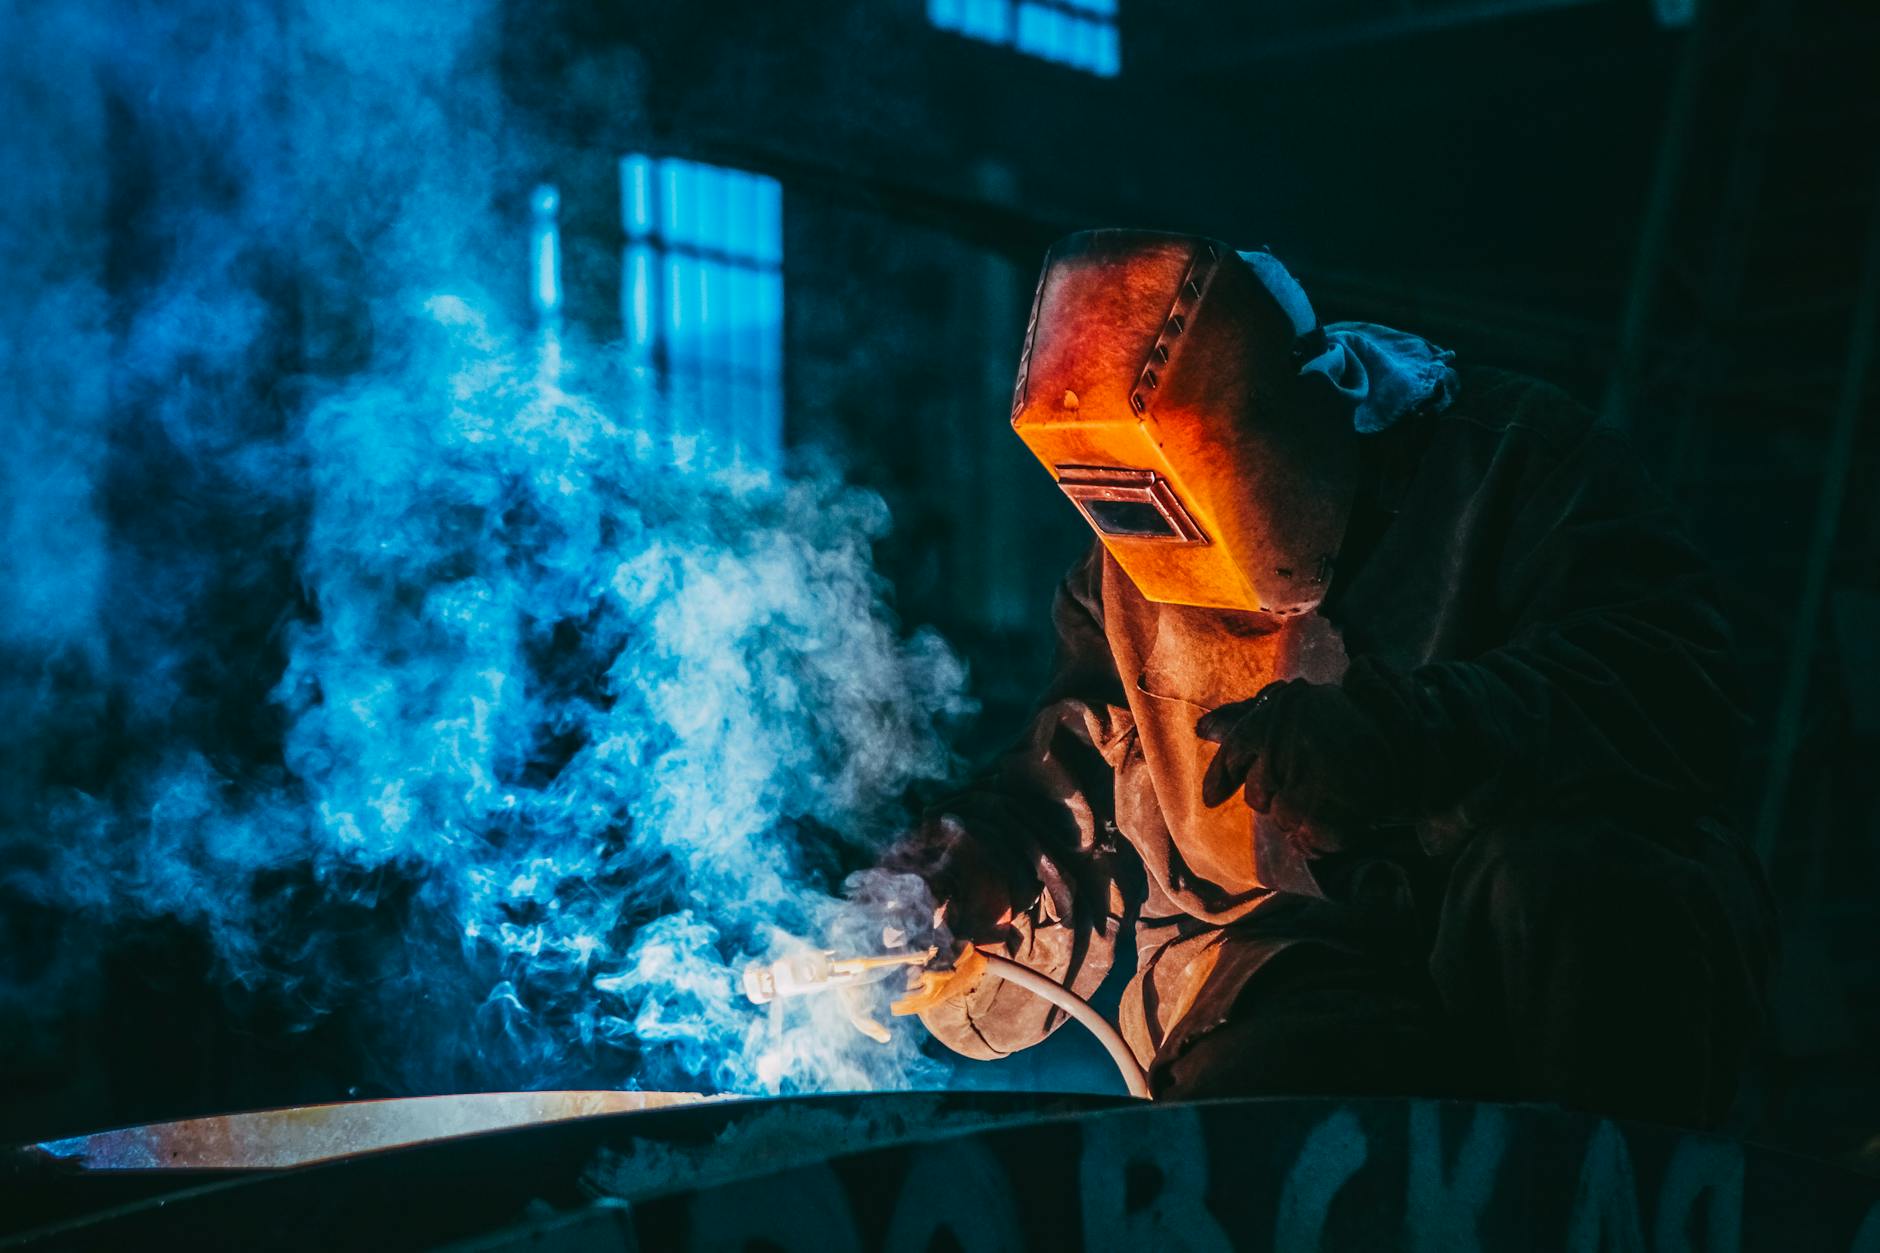 Welding Safety Ebook: Hazards and Control Measures - Free Download